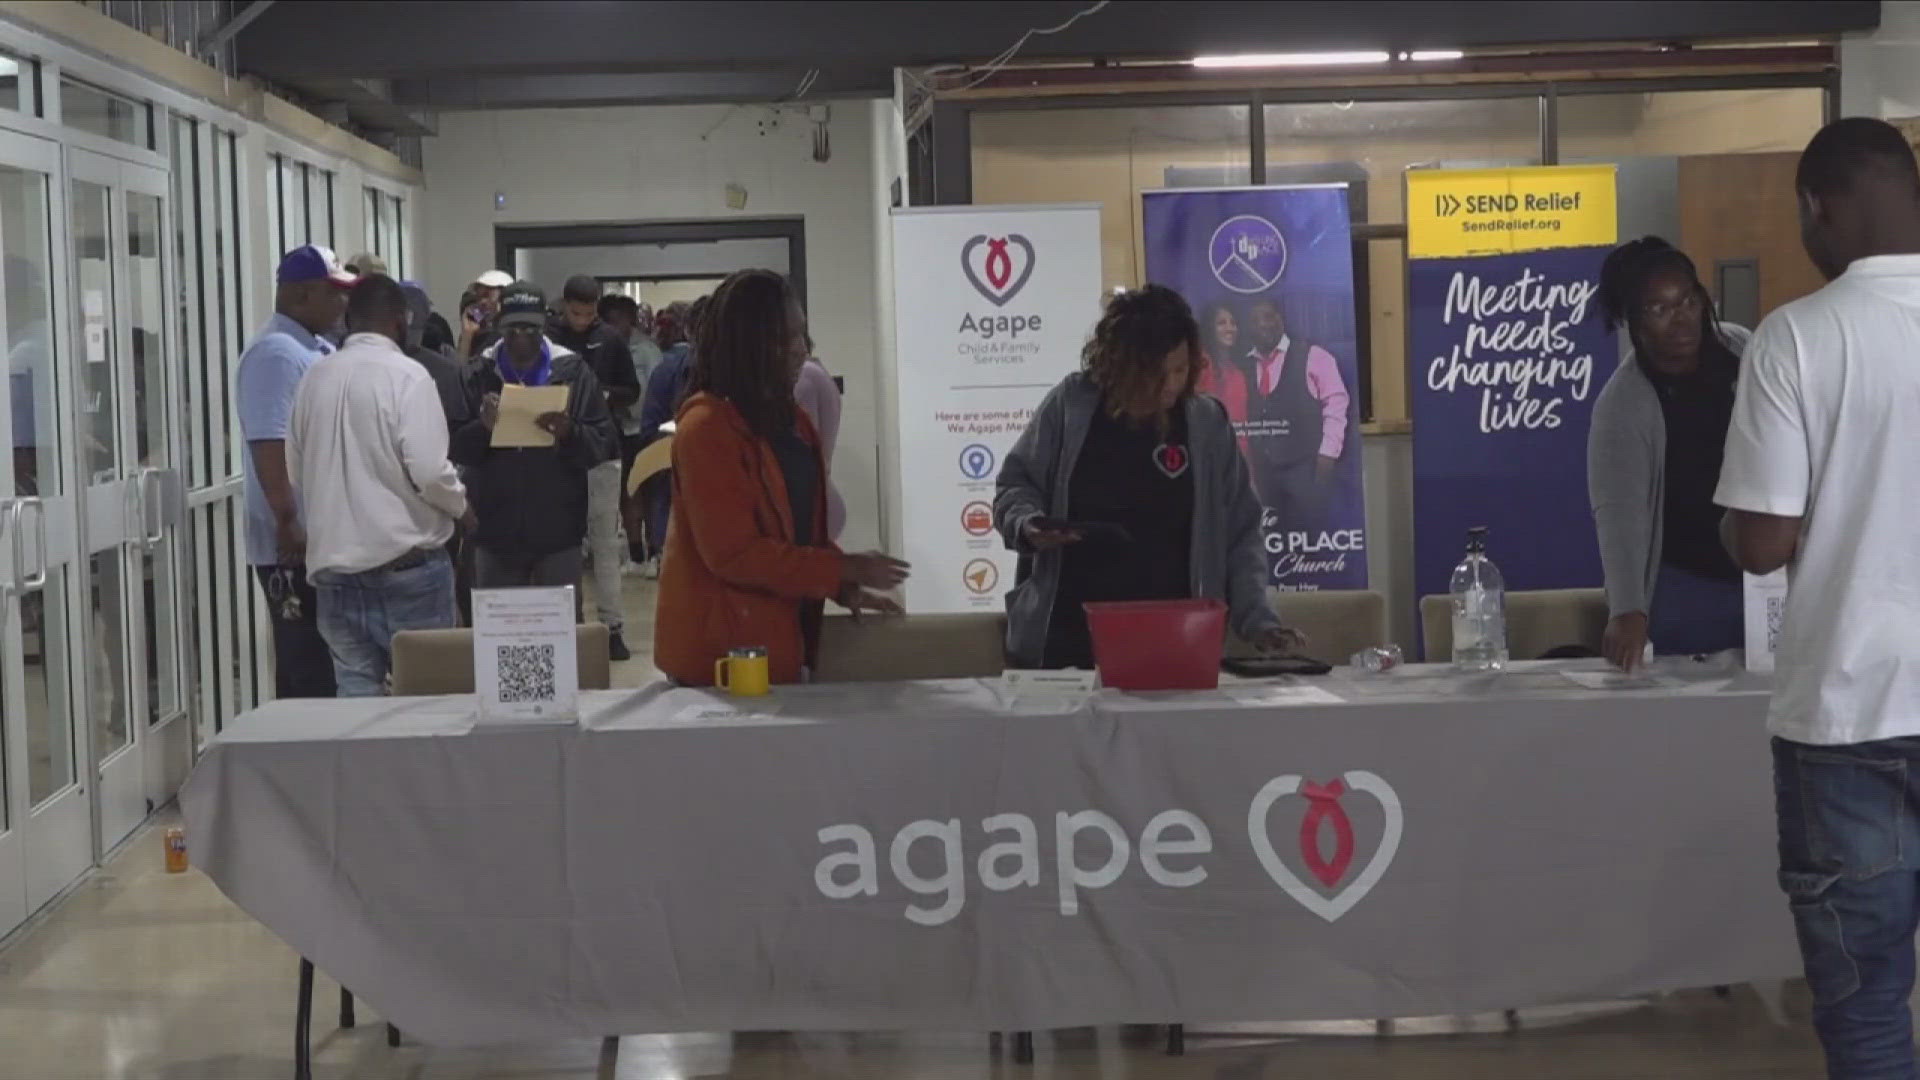 Agape Child & Family Services teamed up with Dwelling Place Christian Church to hold an Expungement and Career Fair on Friday, May 3.